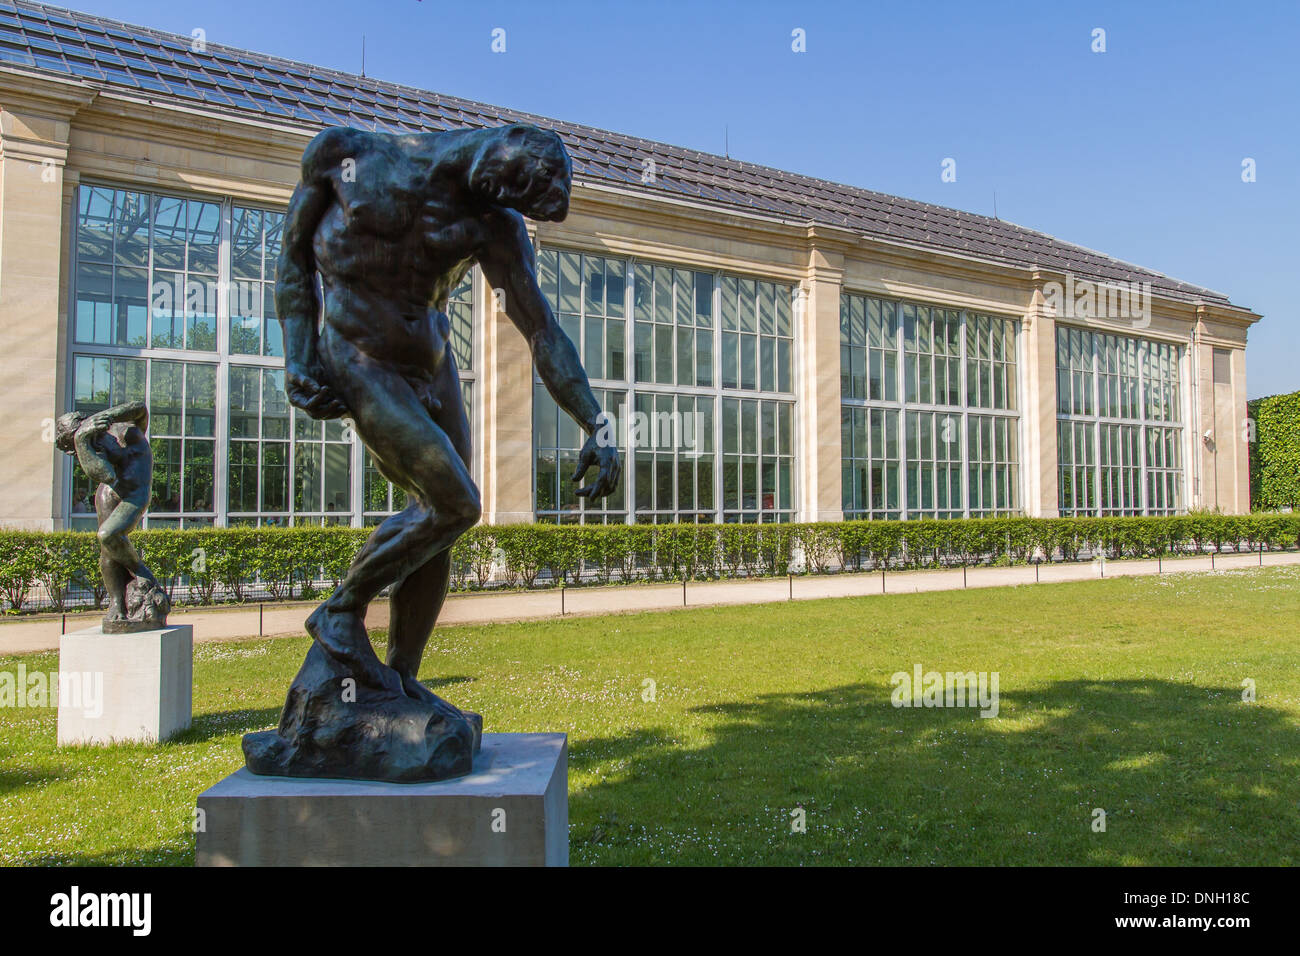 STATUE OF THE GATES OF HELL, RODIN, MUSEUM OF THE ORANGERIE, TUILERIES GARDEN, 1ST ARRONDISSEMENT, PARIS, FRANCE Stock Photo